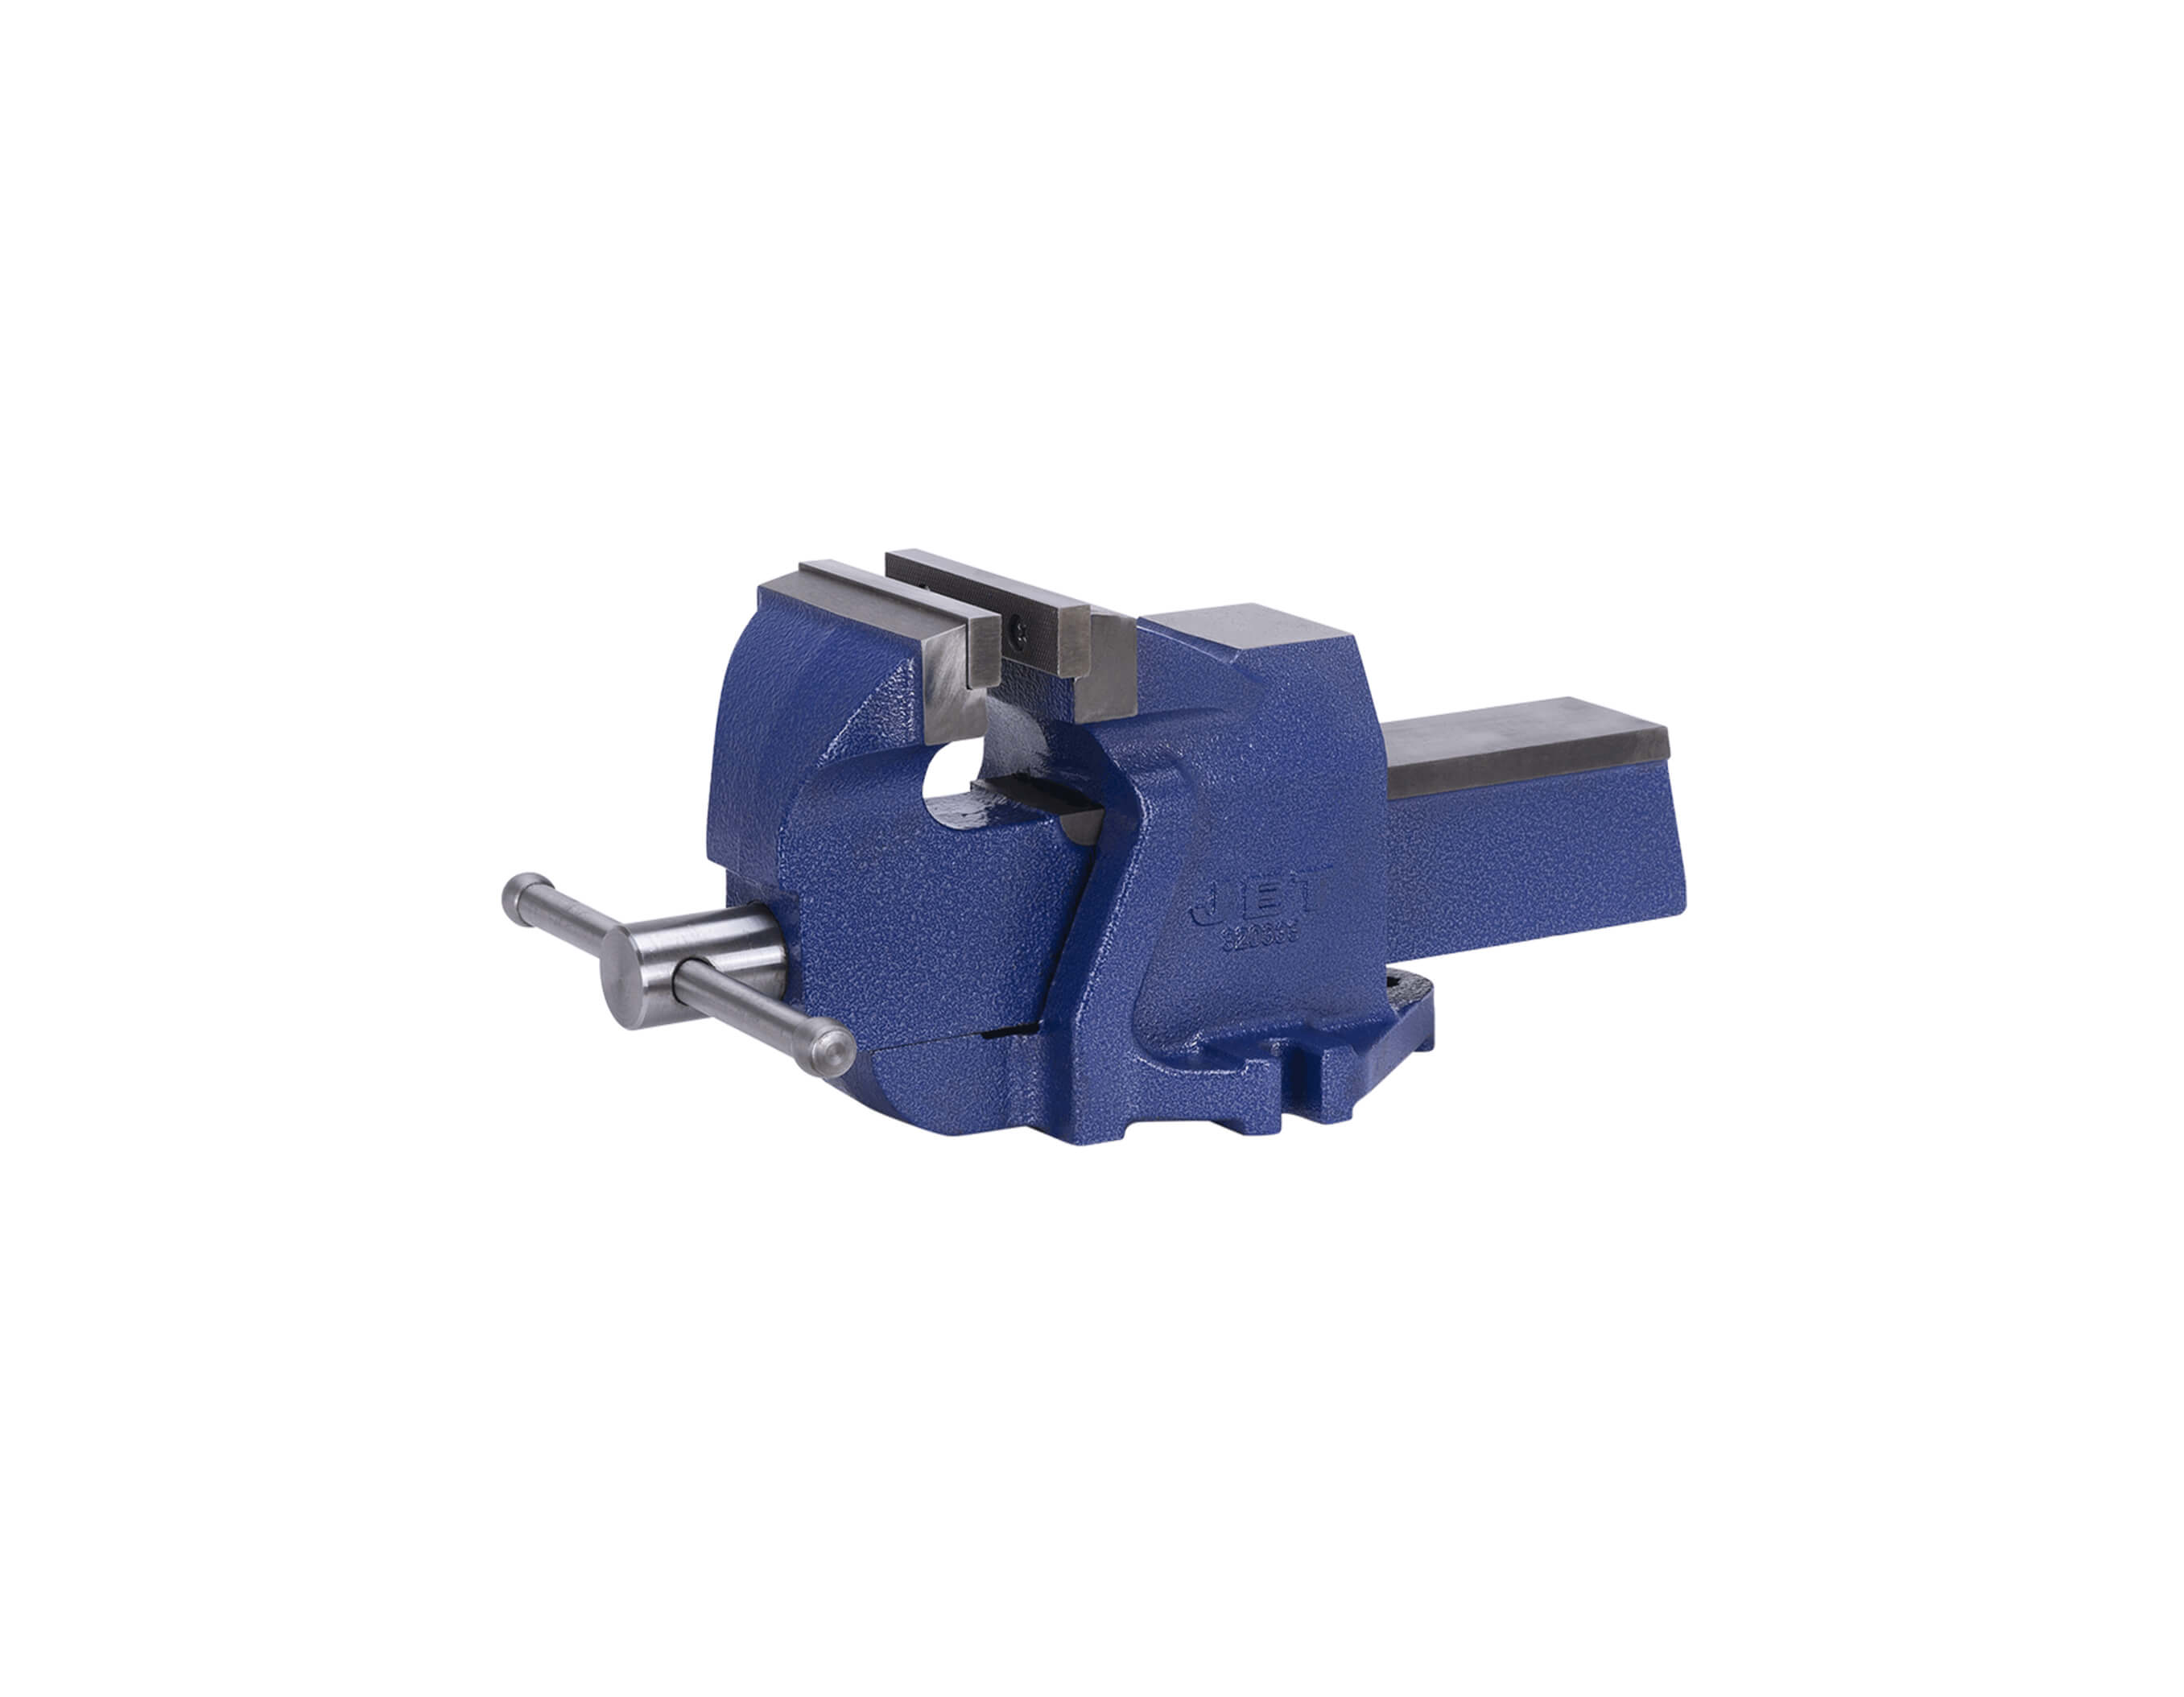 BENCH VISE - 5" JAW WIDTH